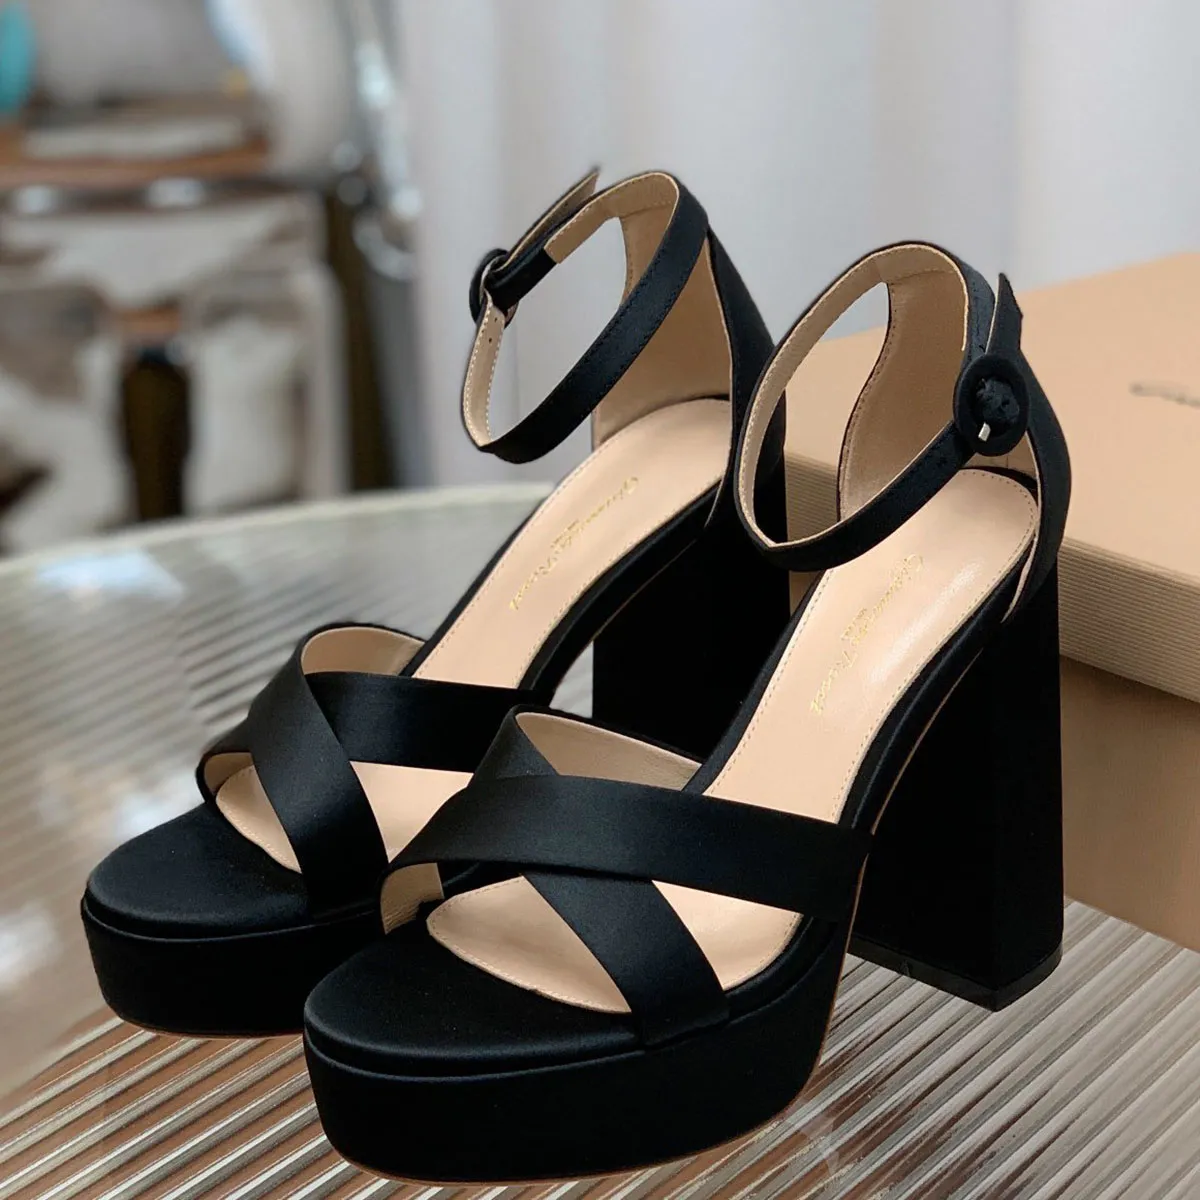 Khadim's Black Colour Sandal/Heels having Synthetic Upper Material - Casual  Use for Women (Size : 3) - Price History